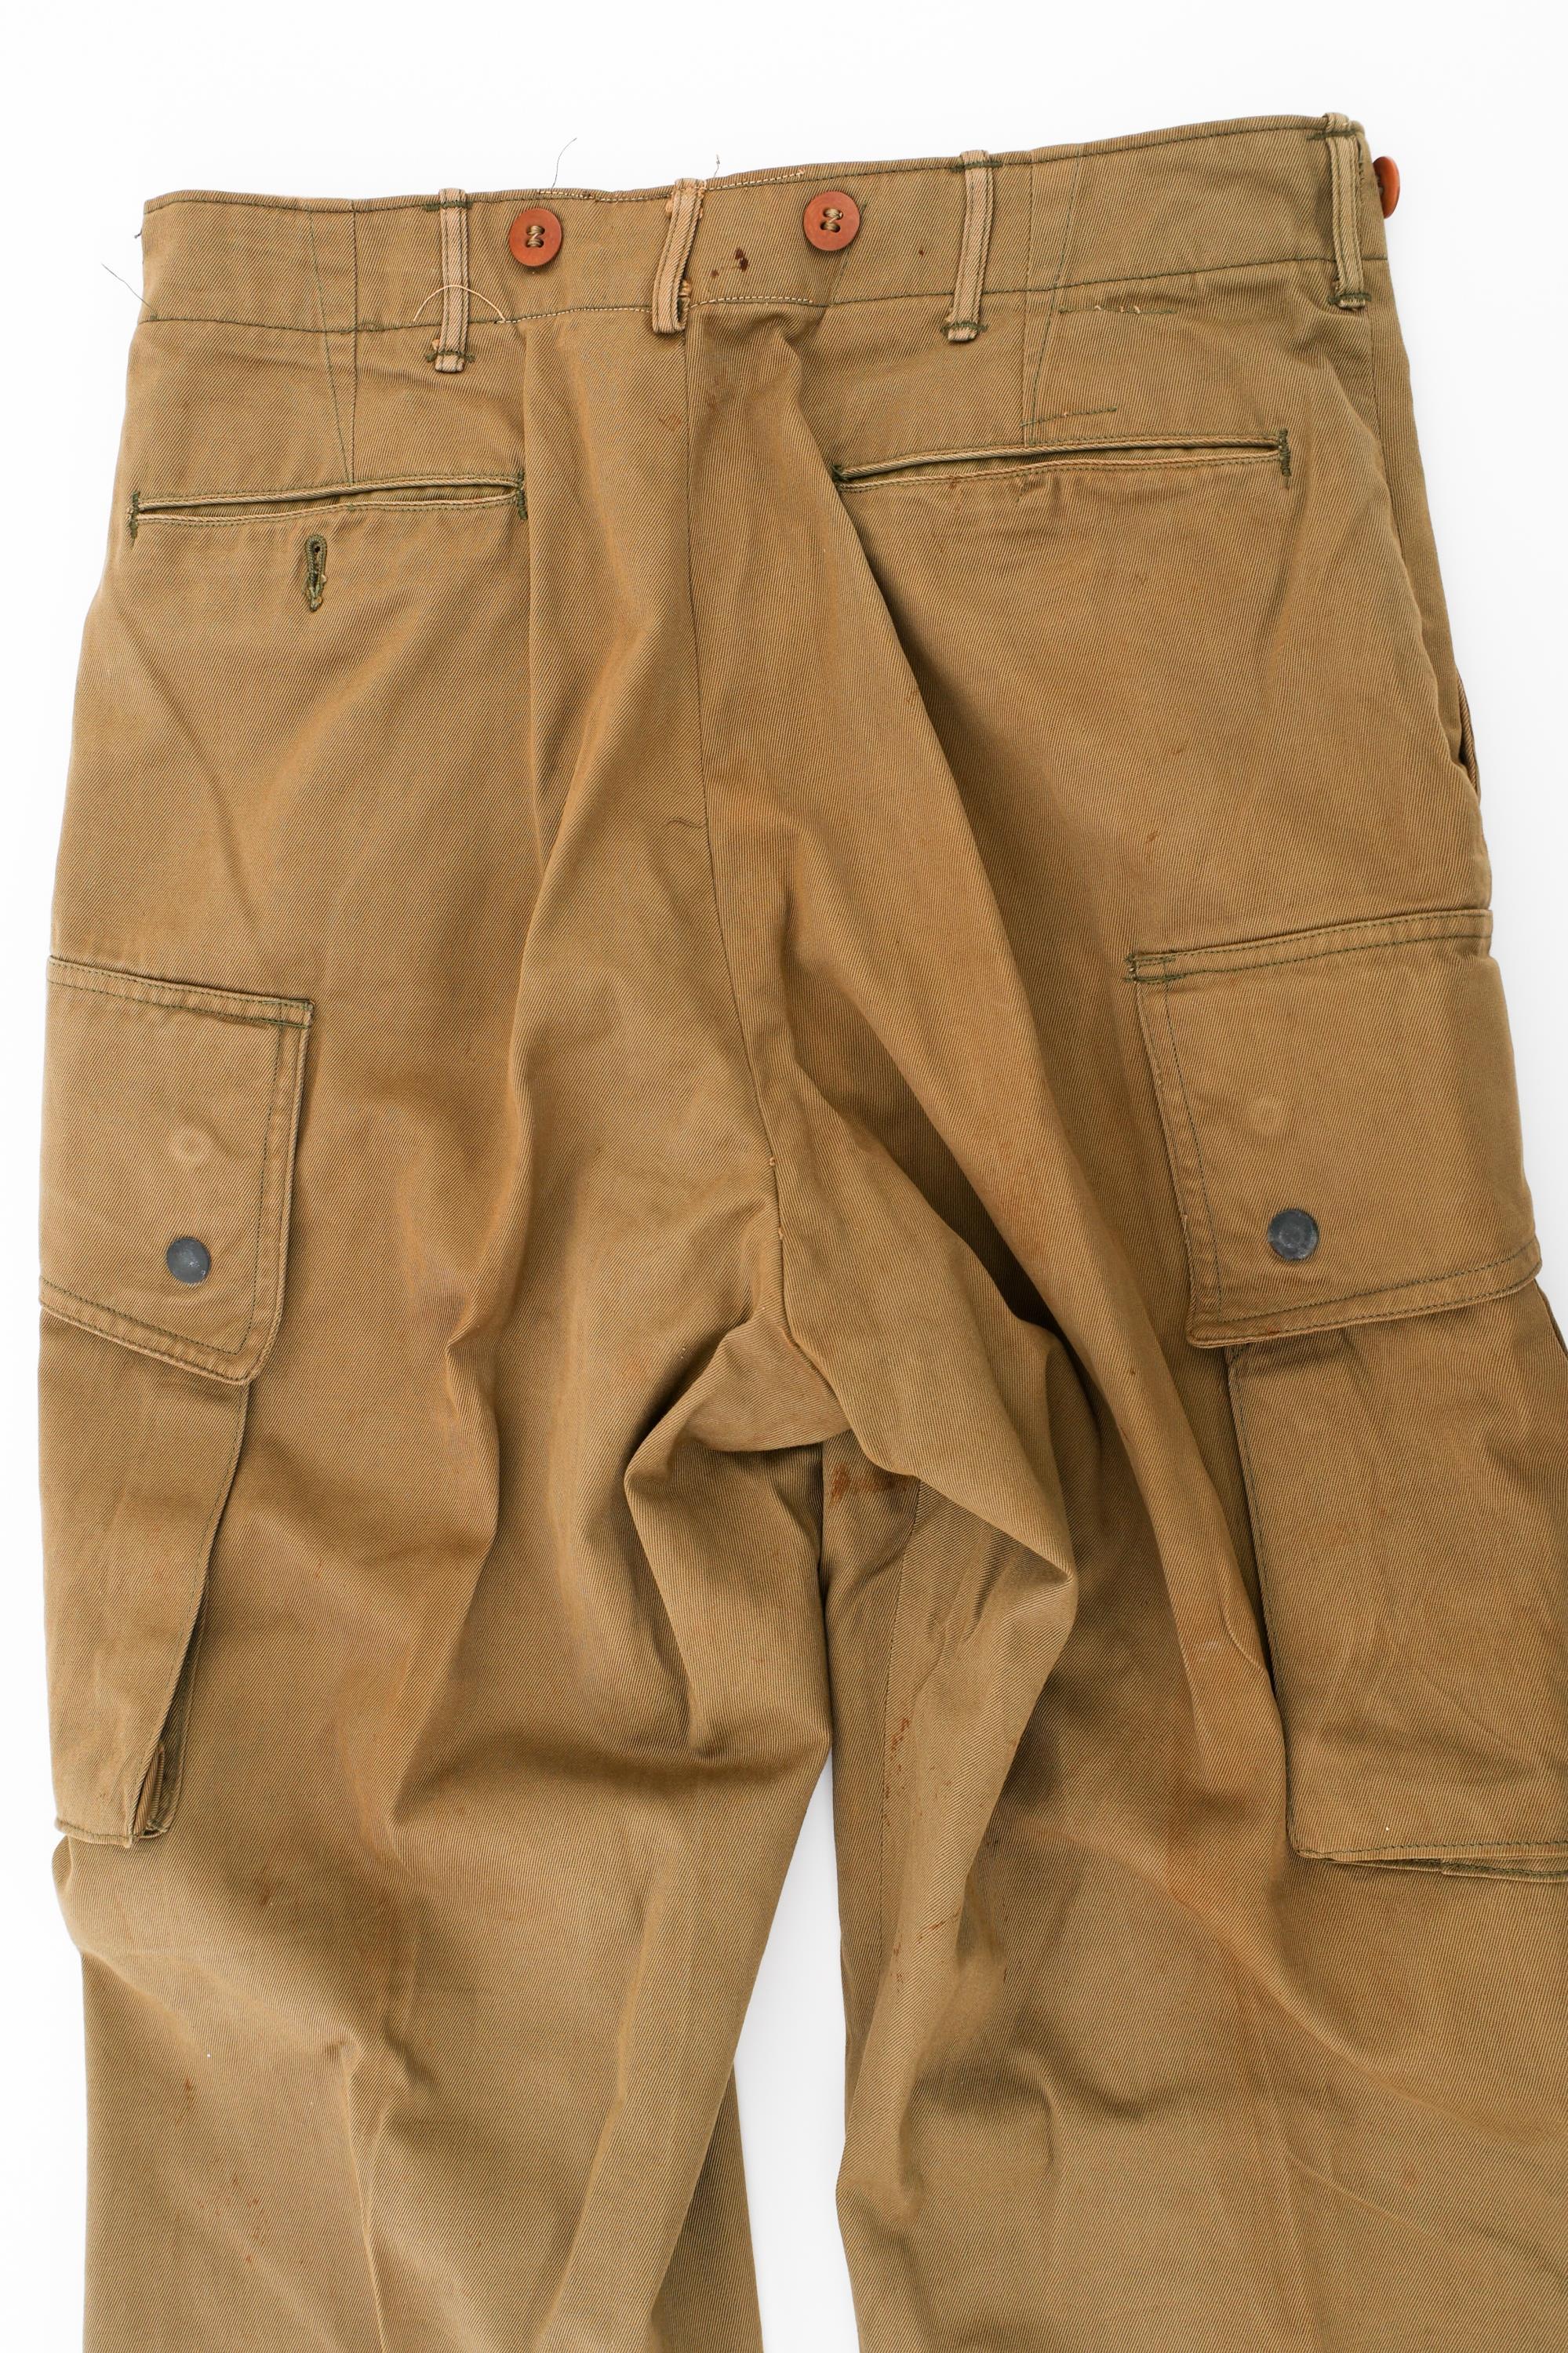 WWII US ARMY AIRBORNE M42 PARATROOPER JUMP PANTS